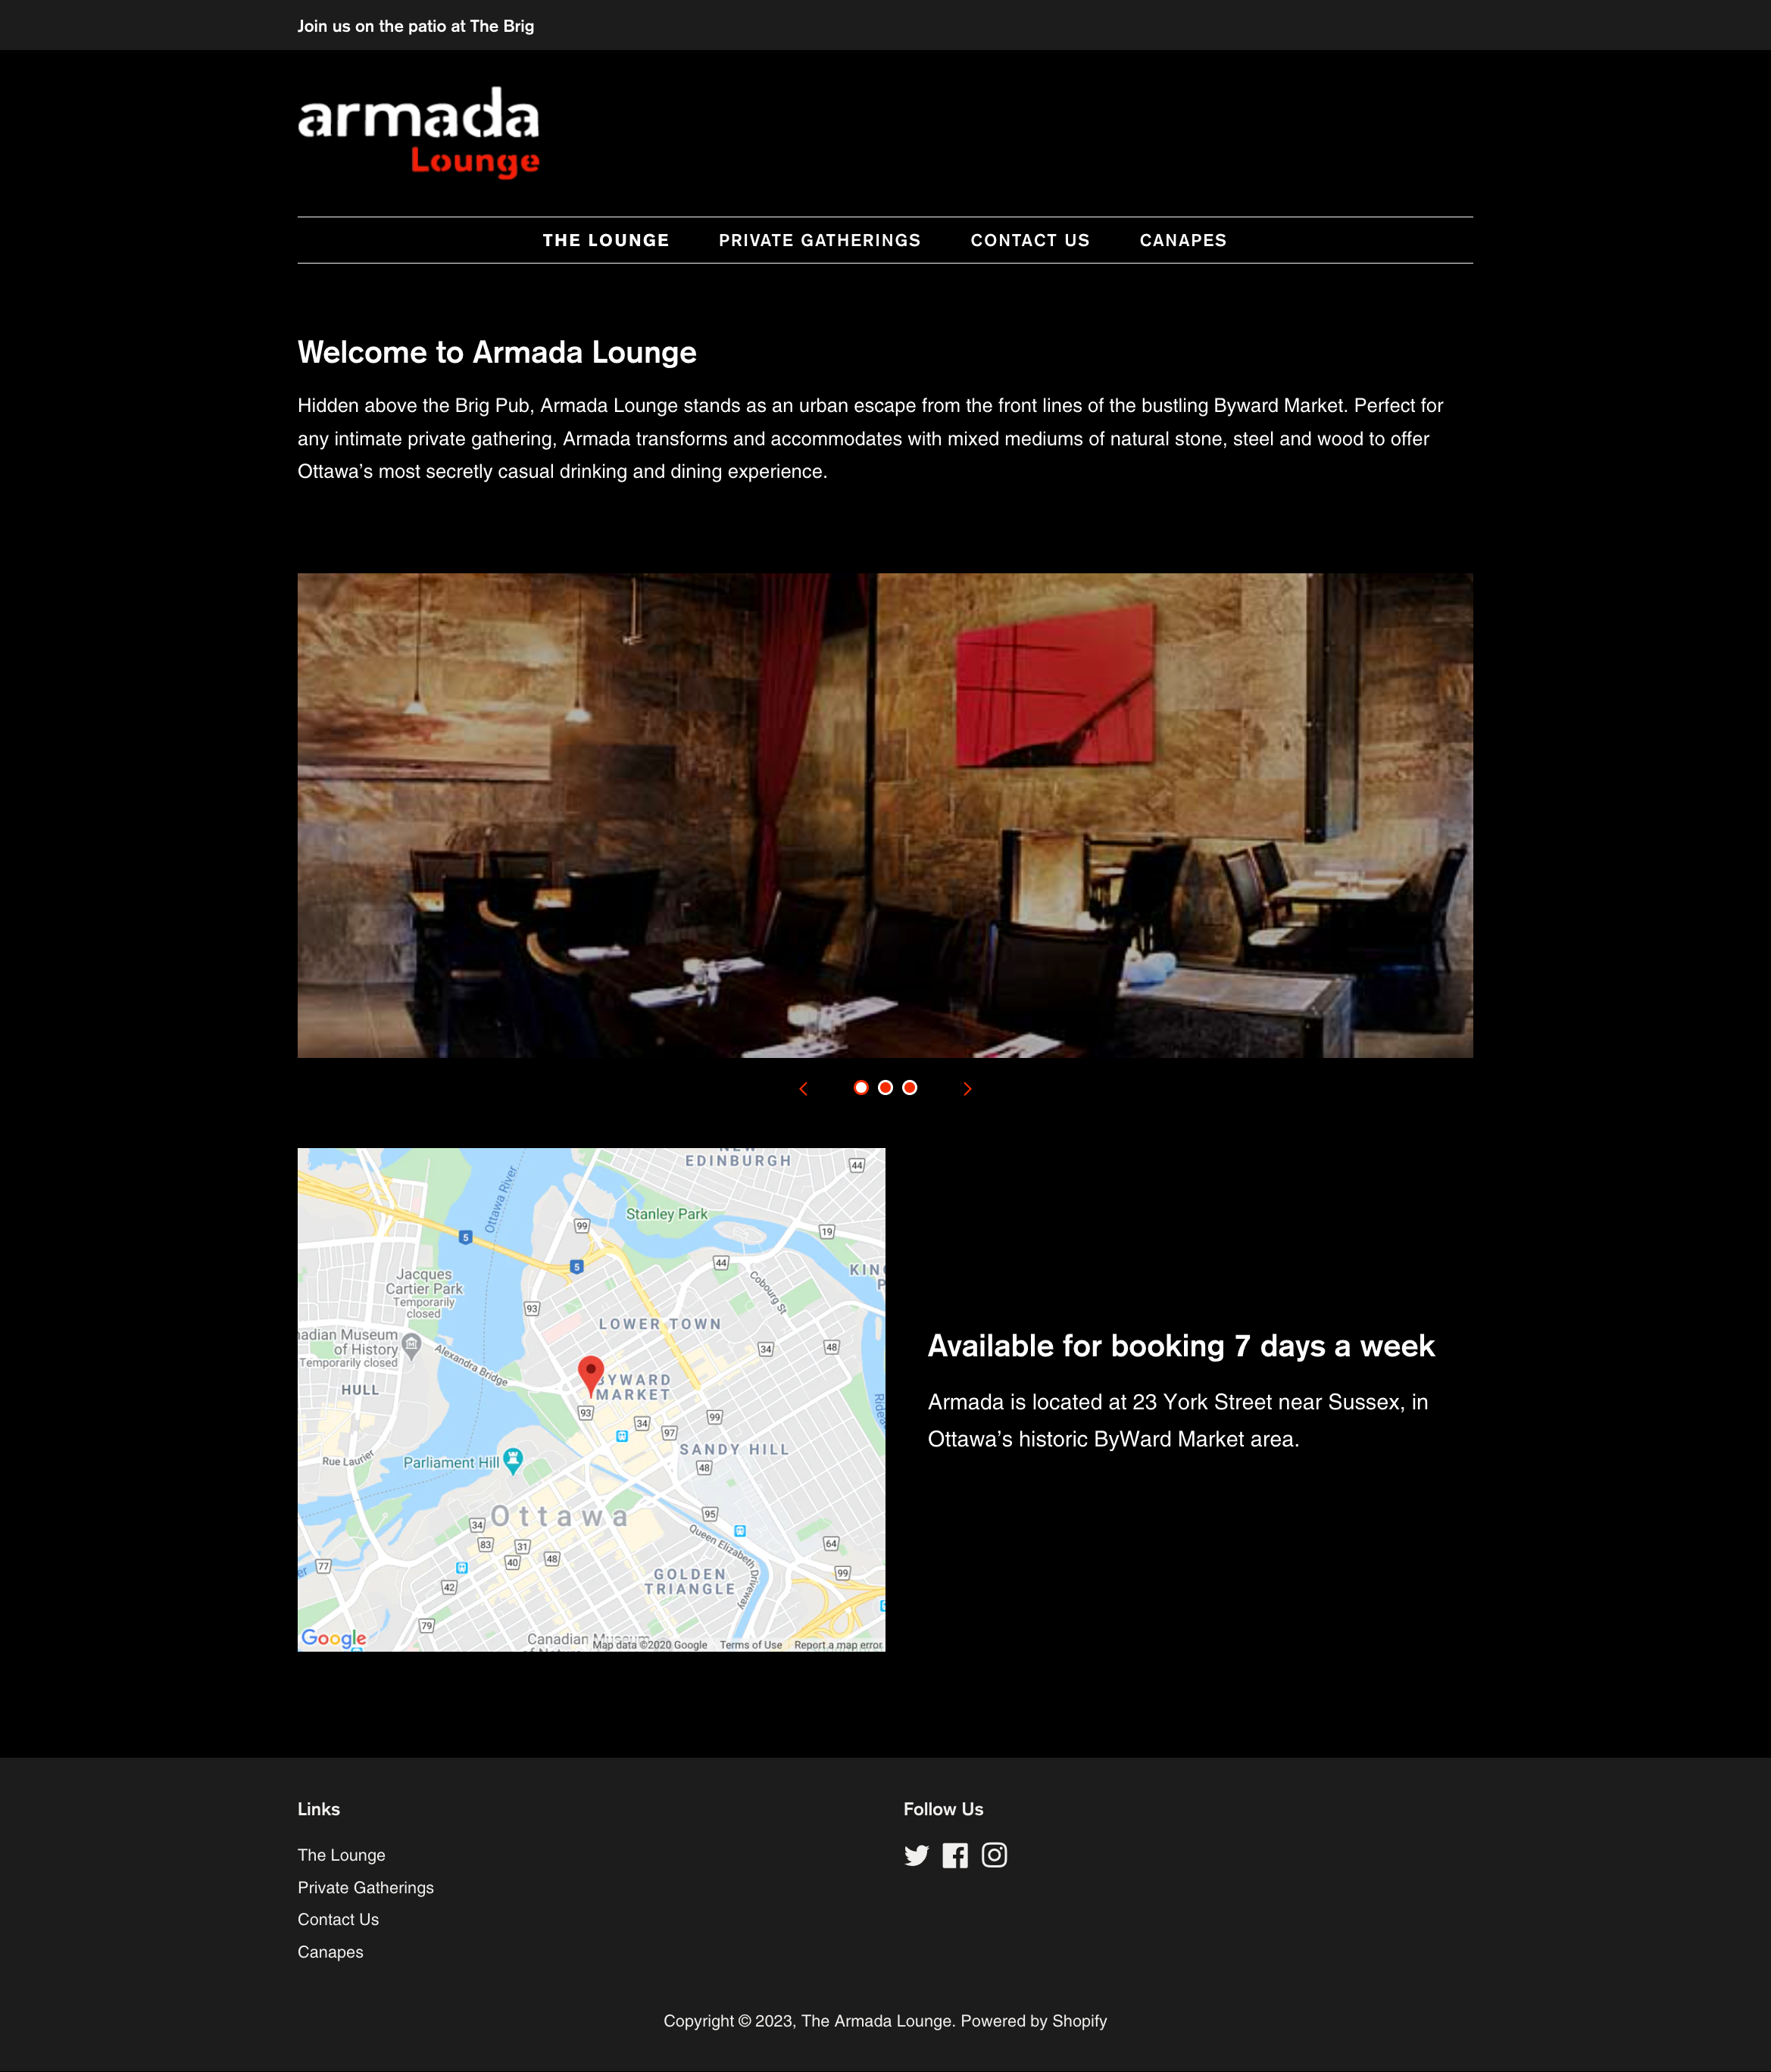 Armada Lounge webpage describing and showing the space.